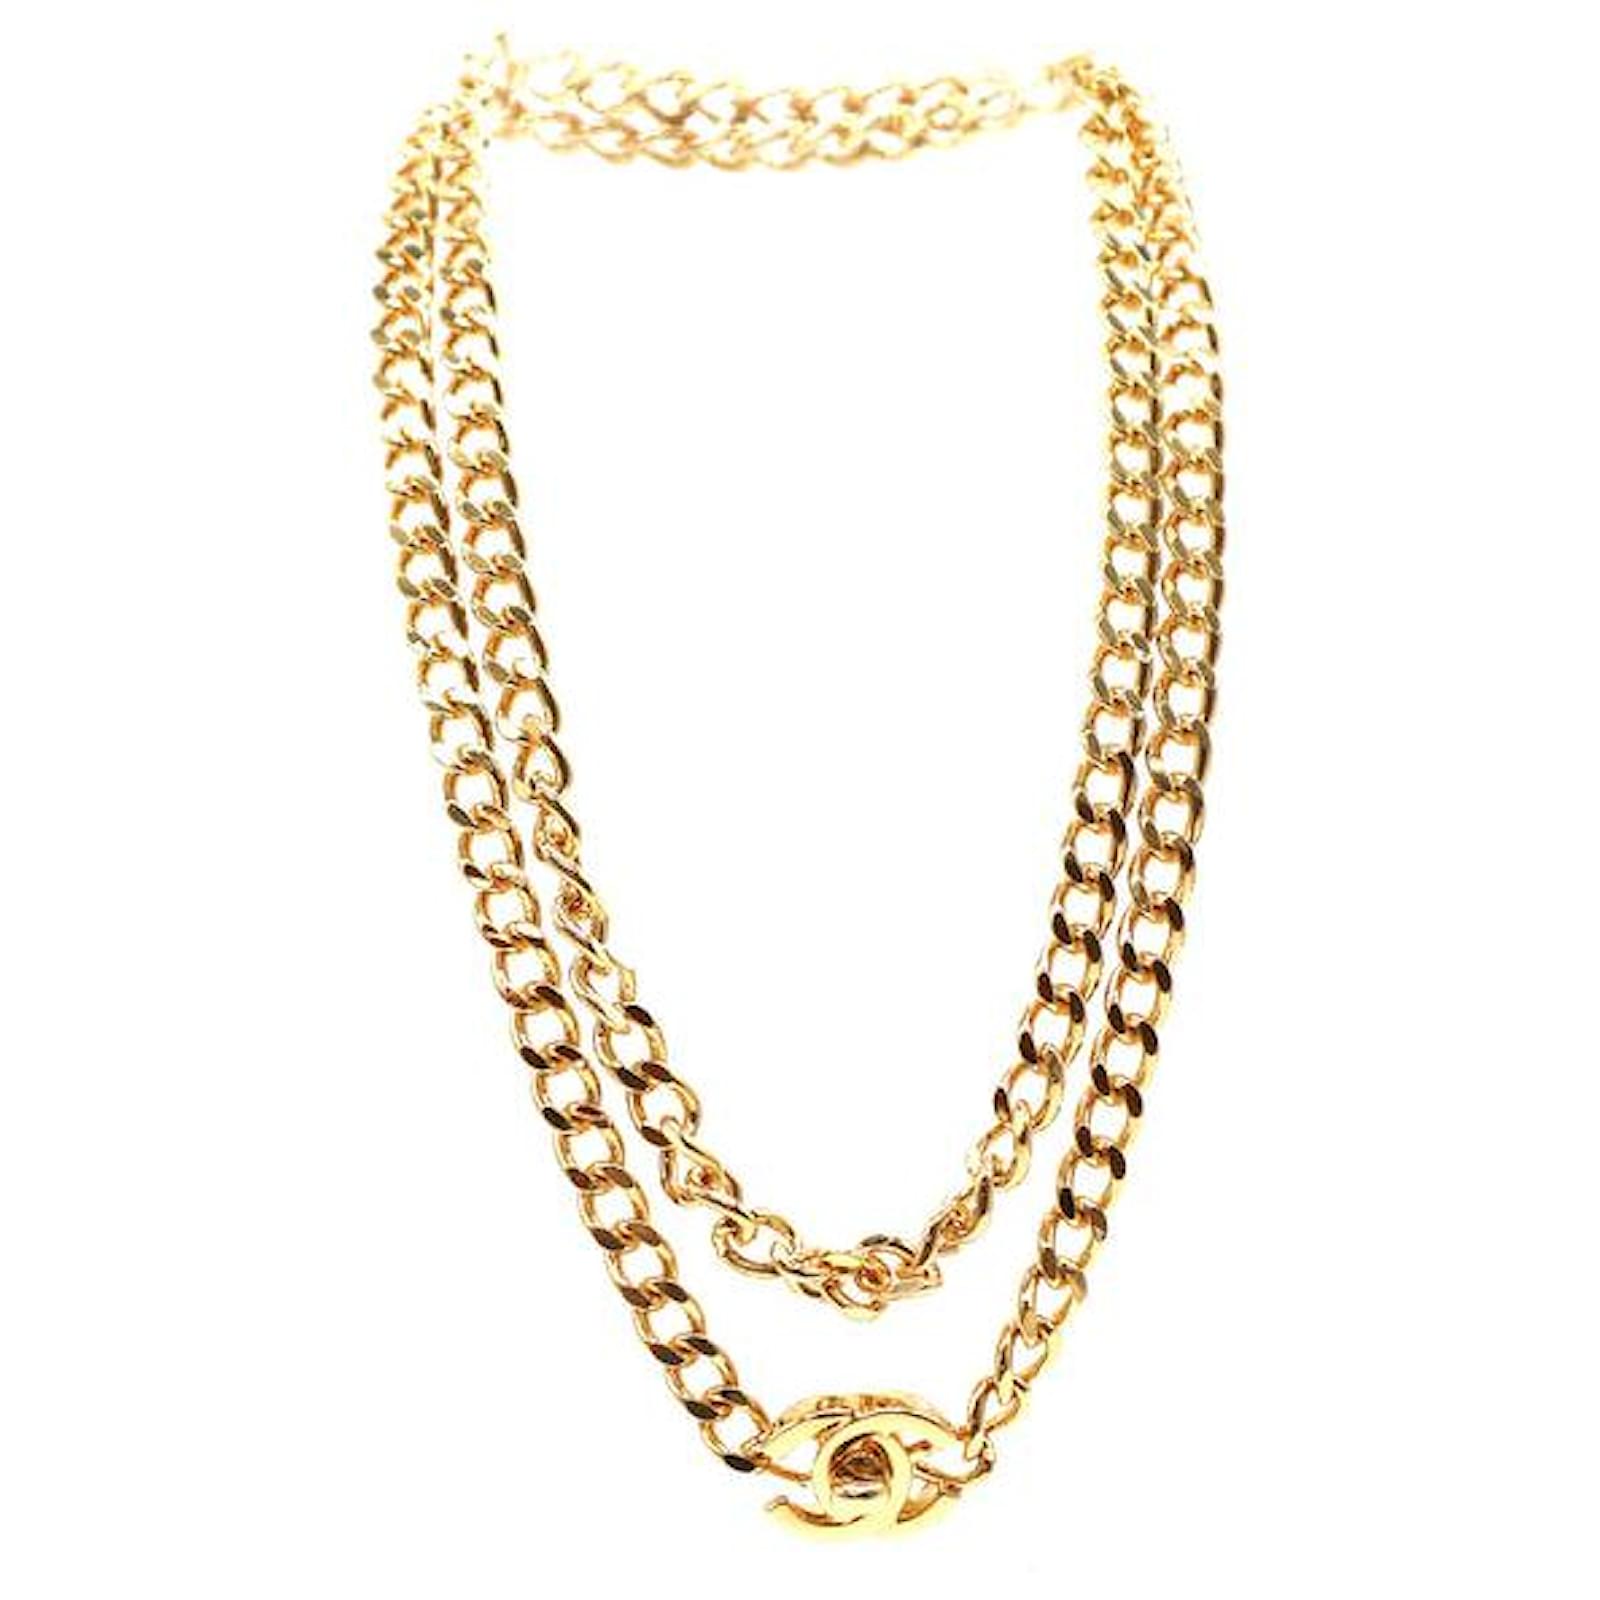 What Goes Around Comes Around Chanel Gold Turnlock Long Necklace | SHOPBOP  | Chanel gold necklace, Long necklace, Holiday necklace